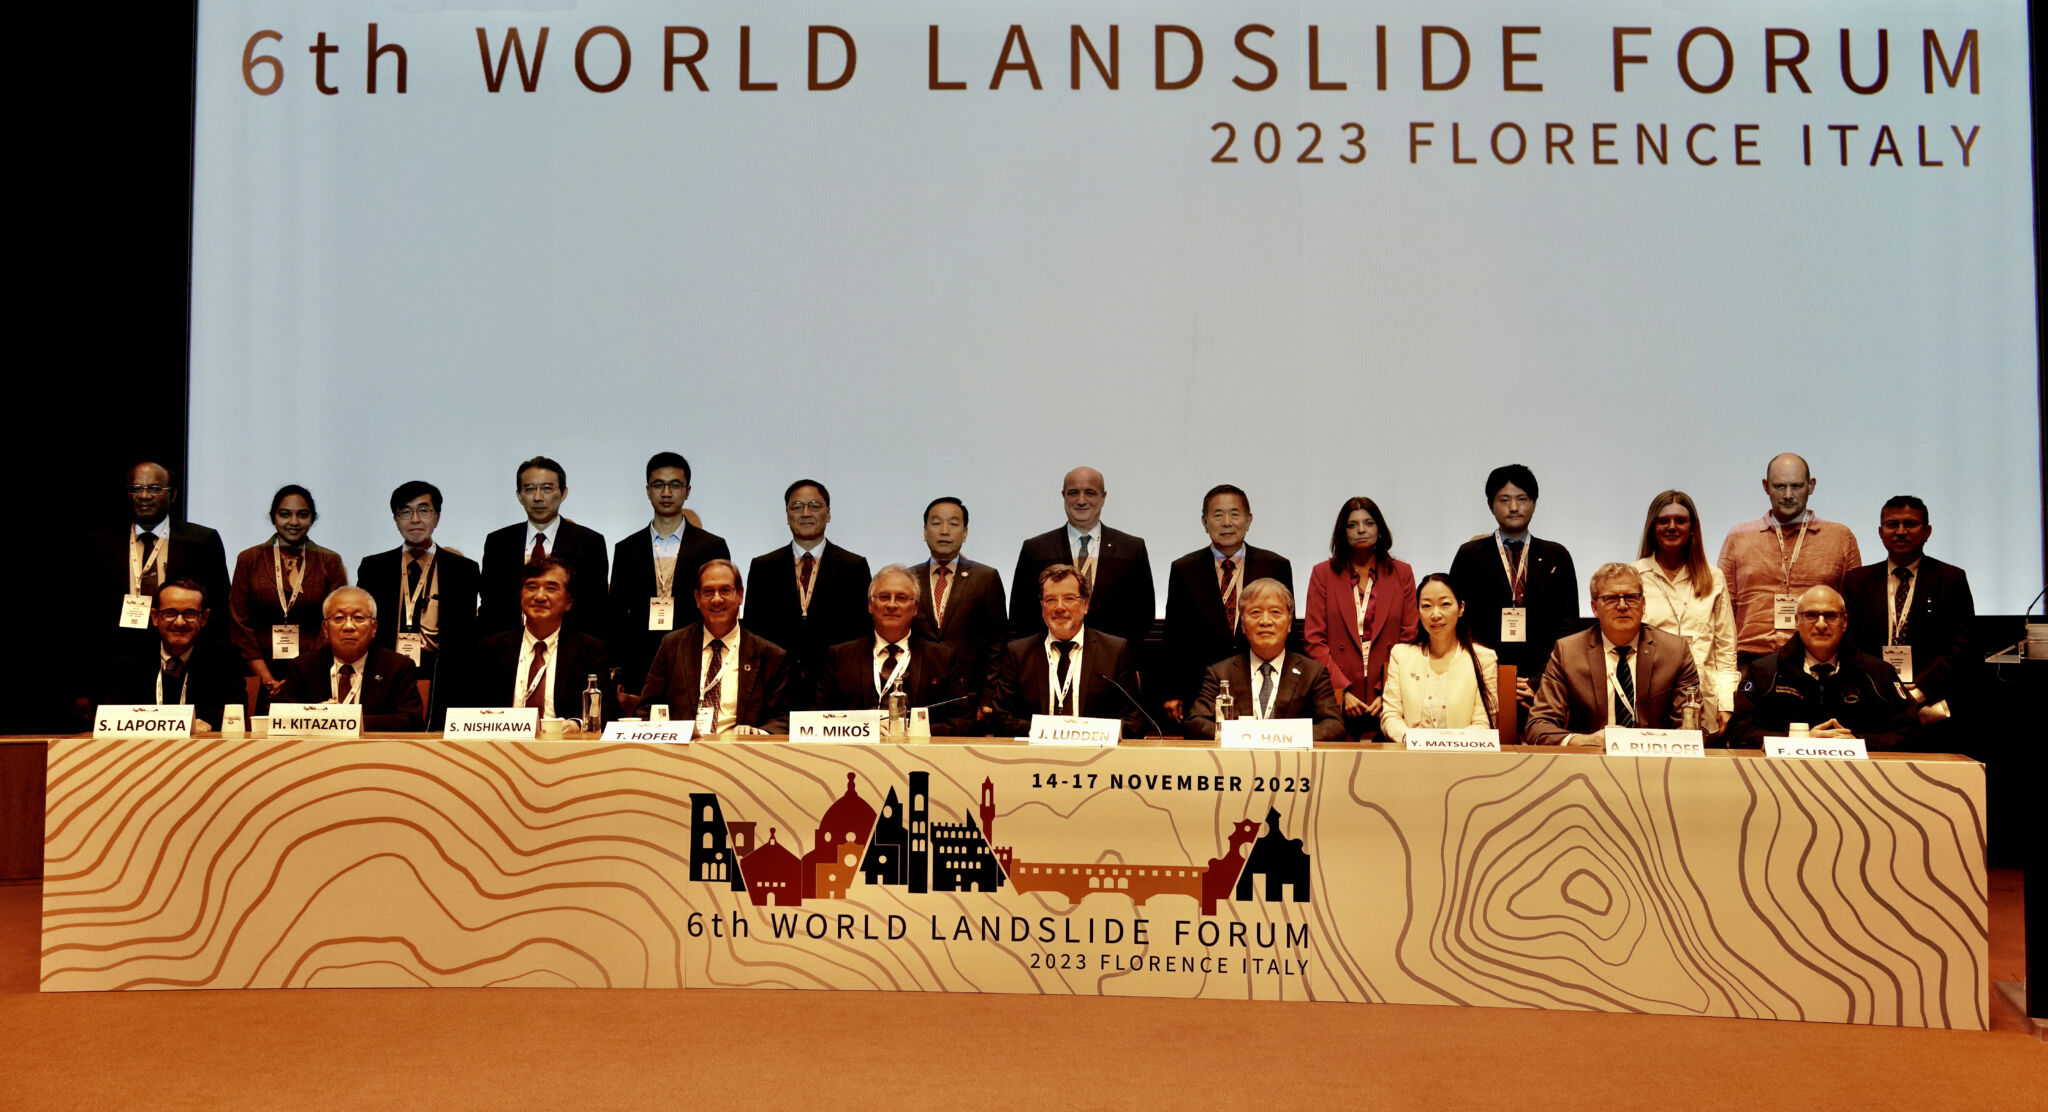 Group photo of the 6th World Landslide Forum